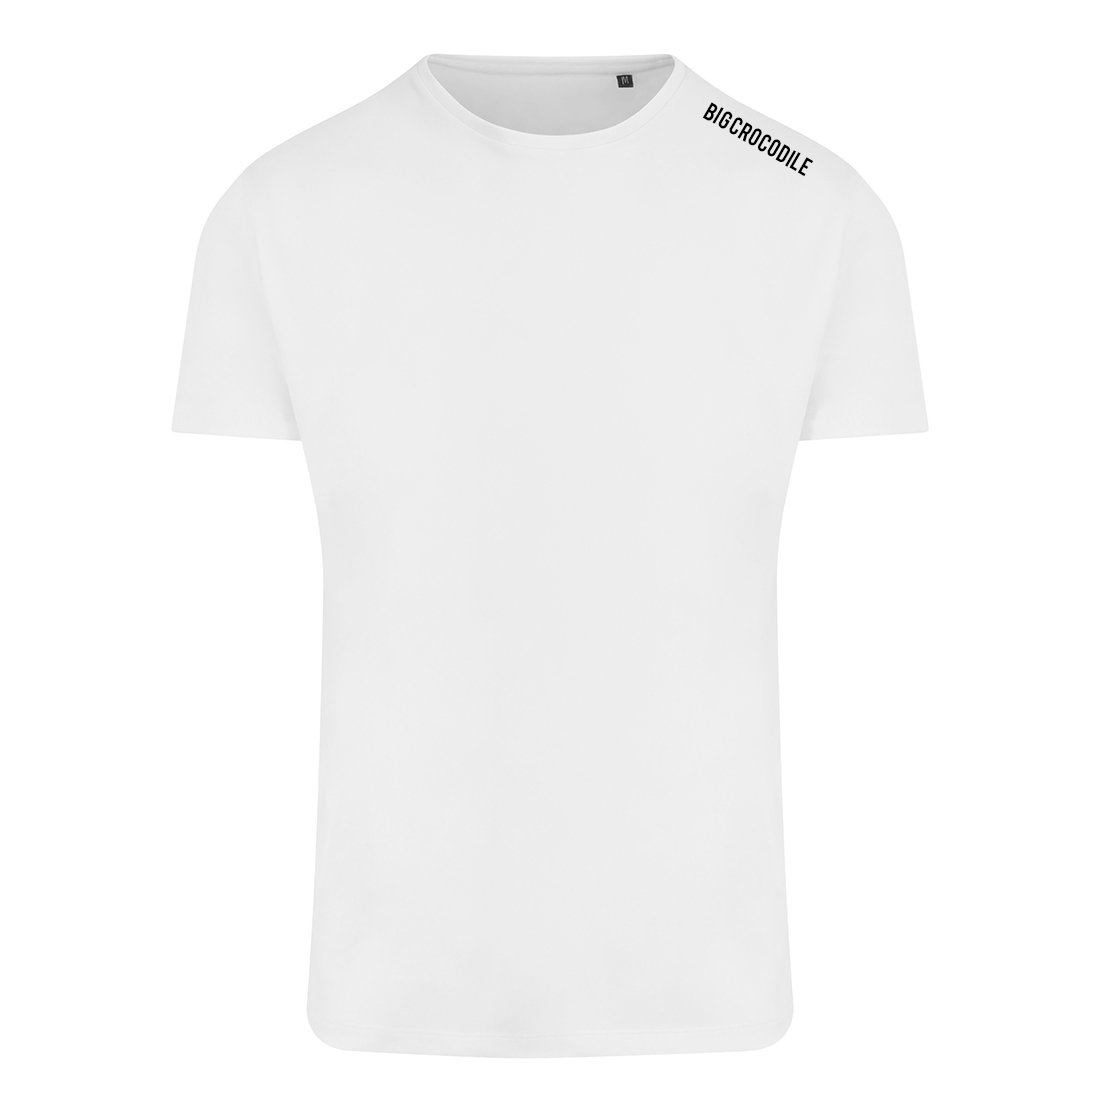 Recycled Sports T Shirt